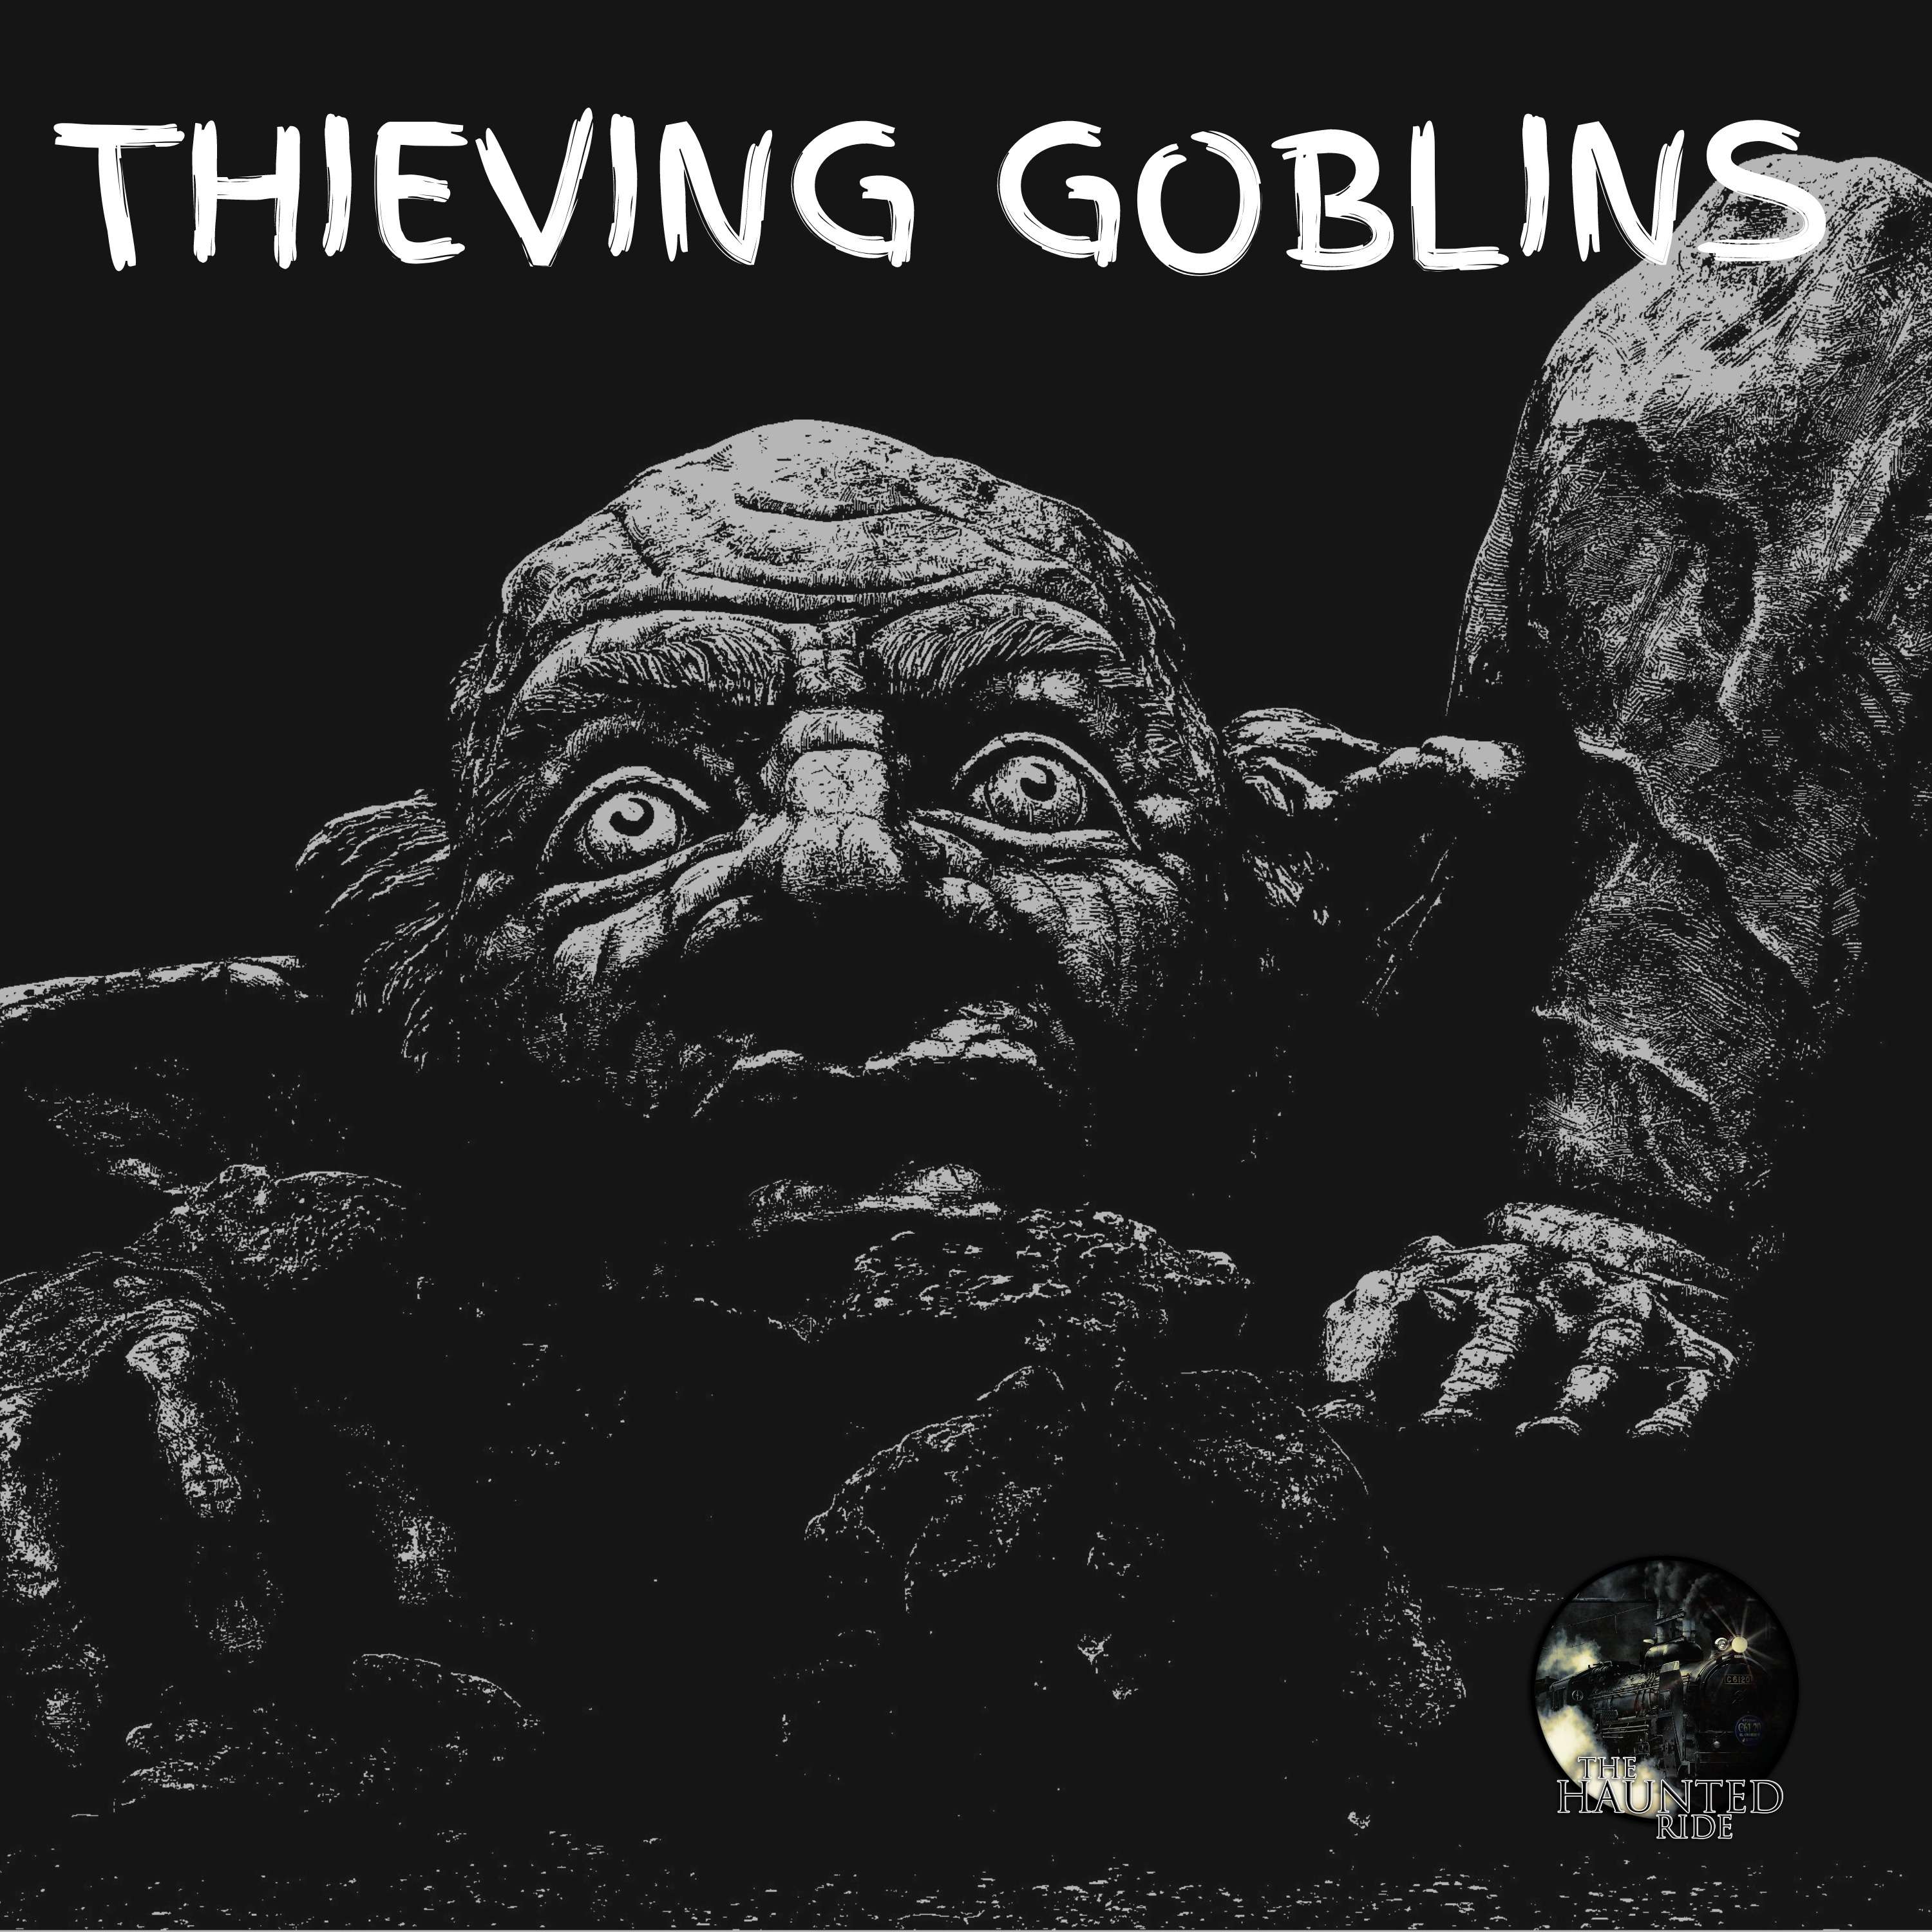 4: Thieving Goblins